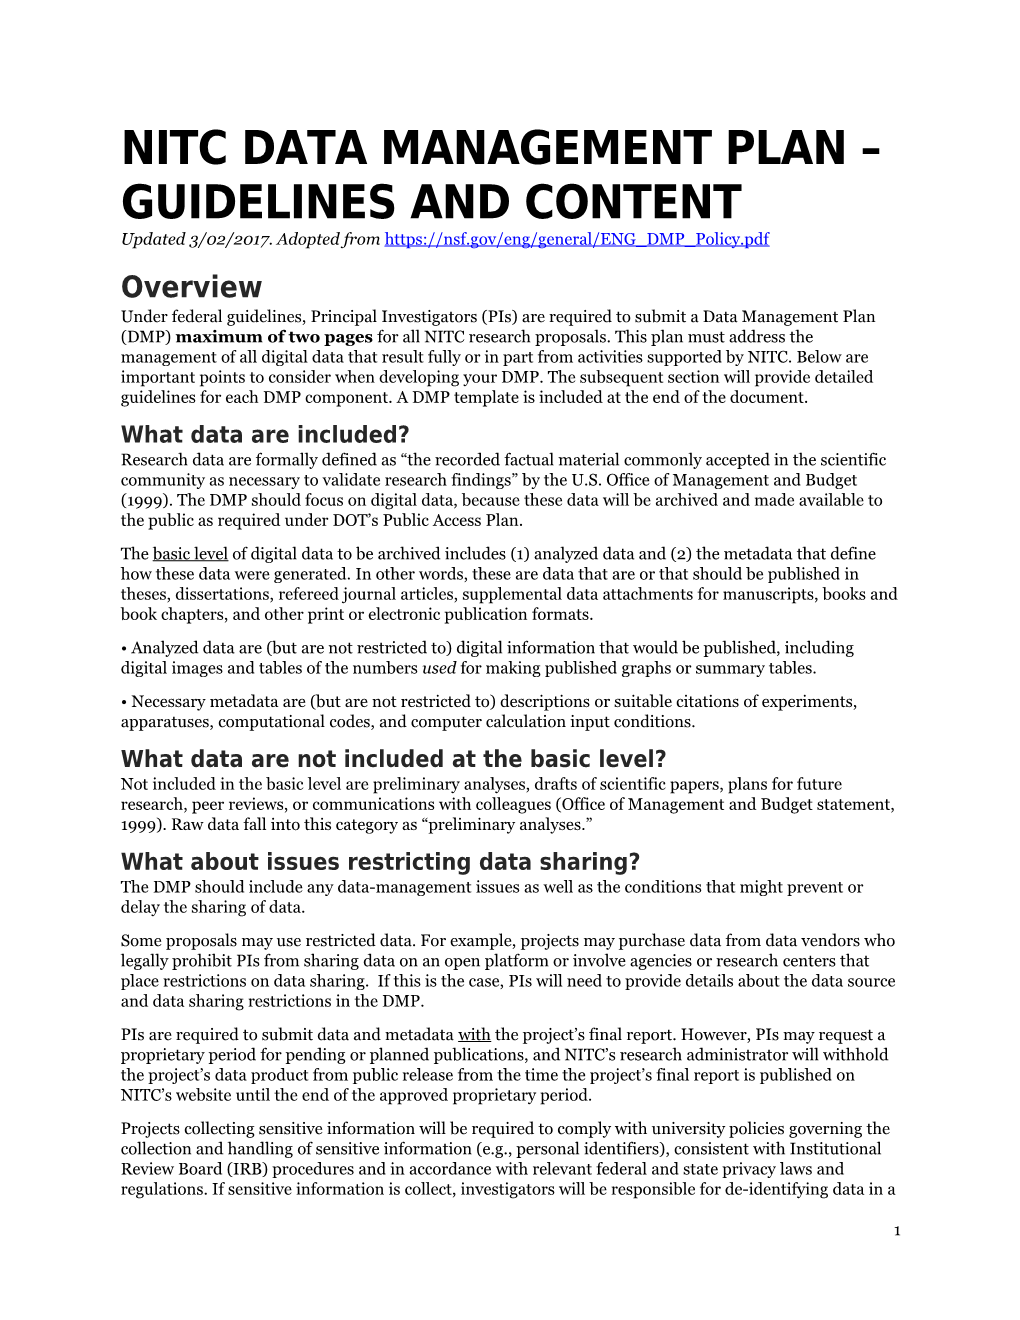 Nitc Data Management Plan Guidelines and Content